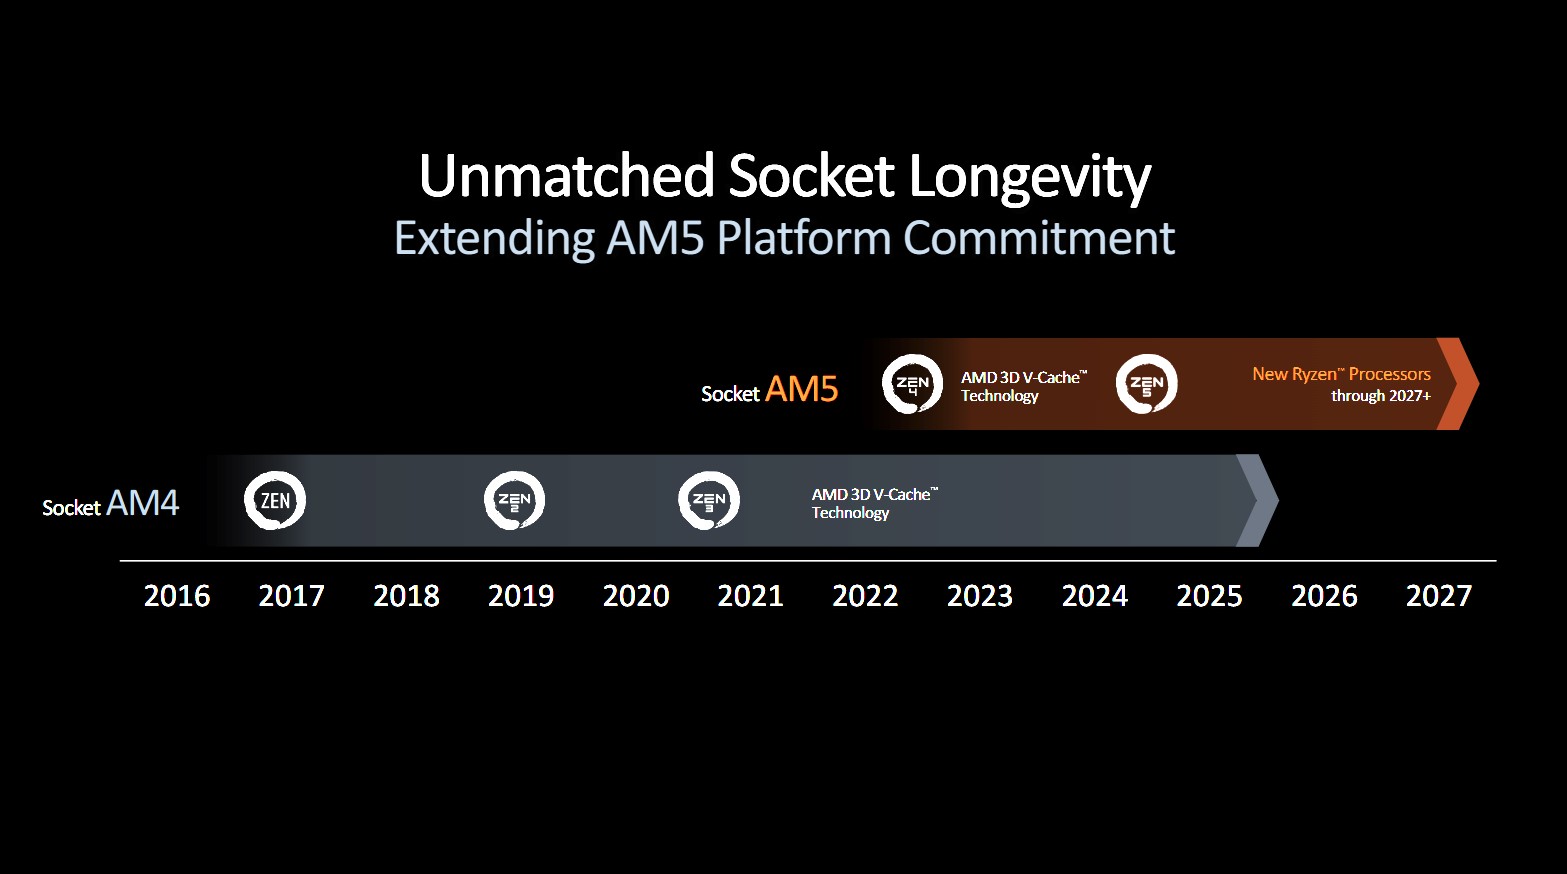 A slide showing the lifecycle of the AM5 platform.